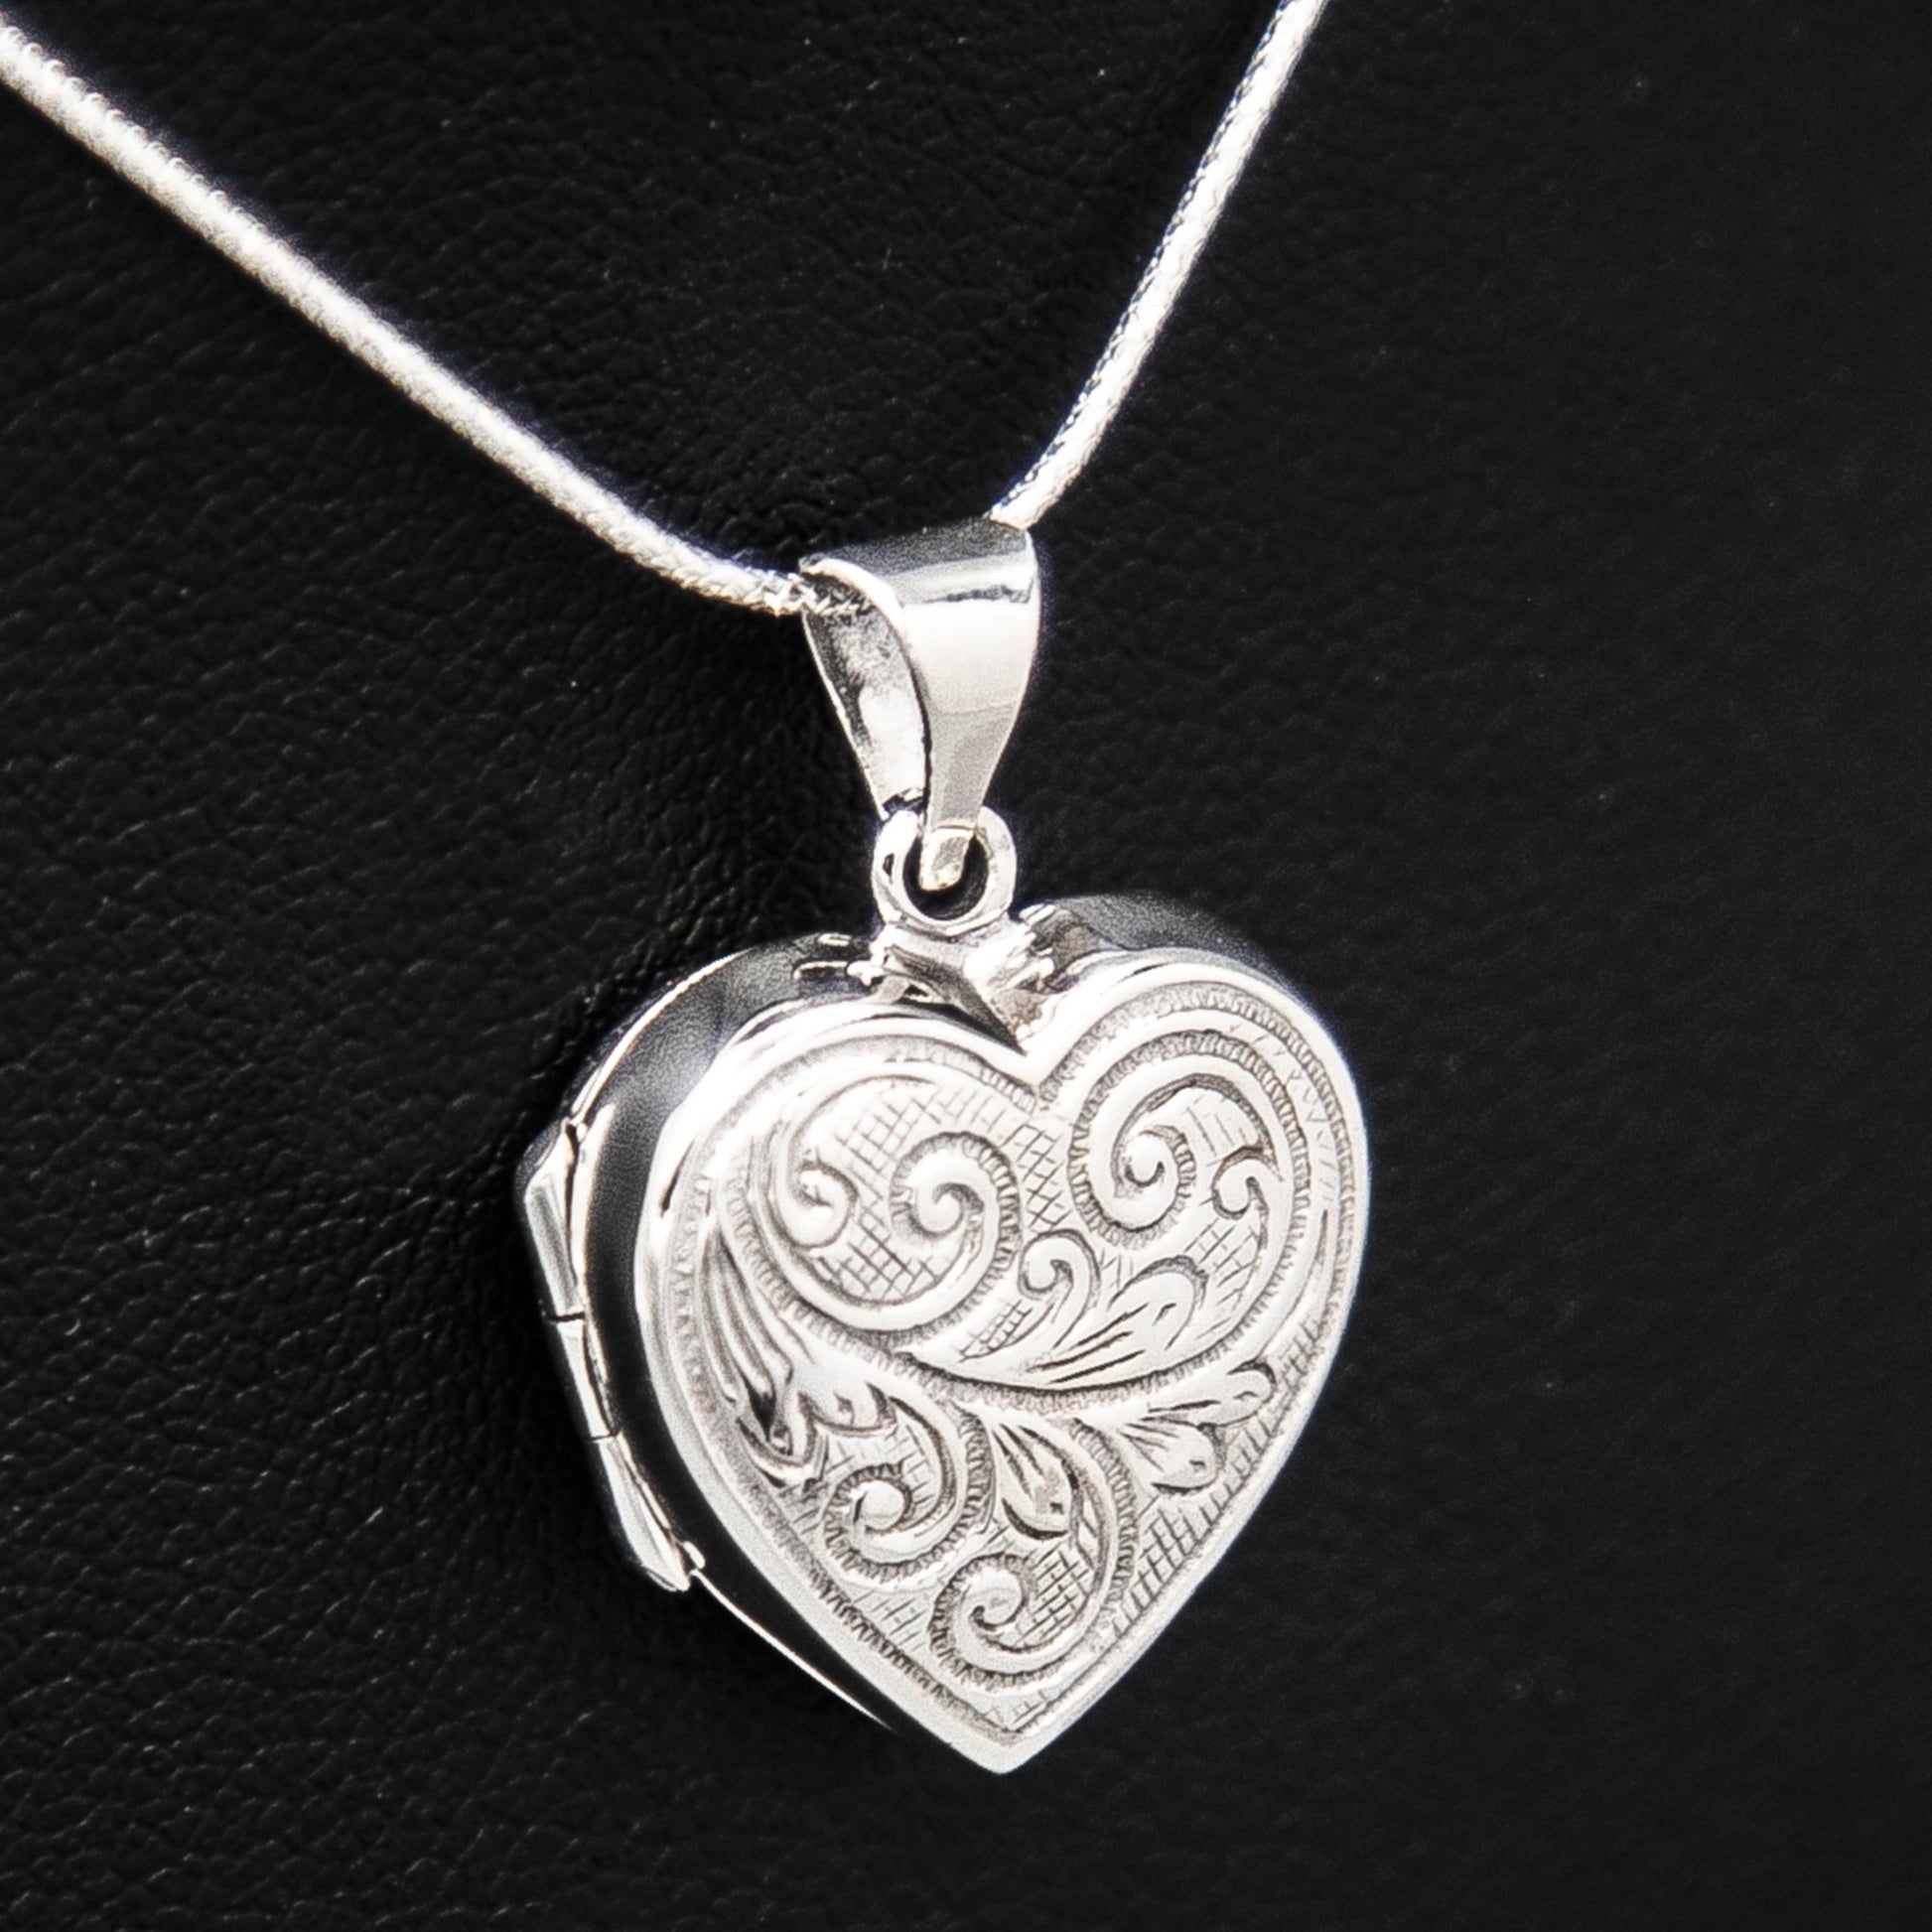 Silver Necklace locket pendant with embellishment on silver chain displayed on black